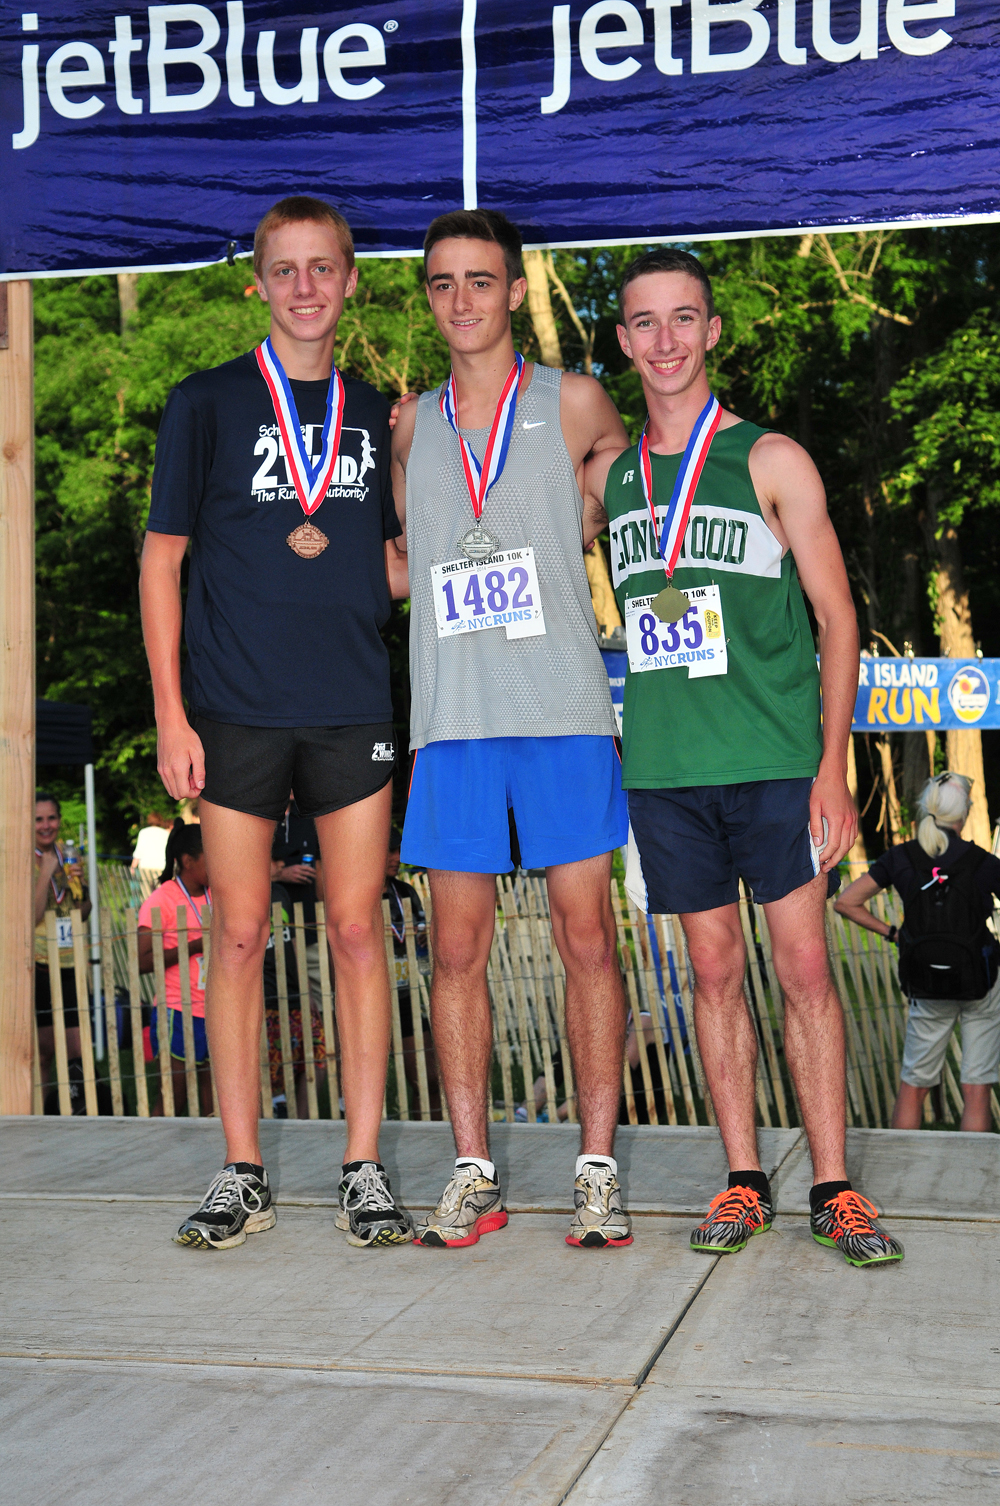 Keith Steinbrecher of Shoreham-Wading River High School, Nicholas Sherman of Huntington High School and Zachary Malik of Longwood High School finished third through first in the 19U male age group. (Credit: Bill Landon)